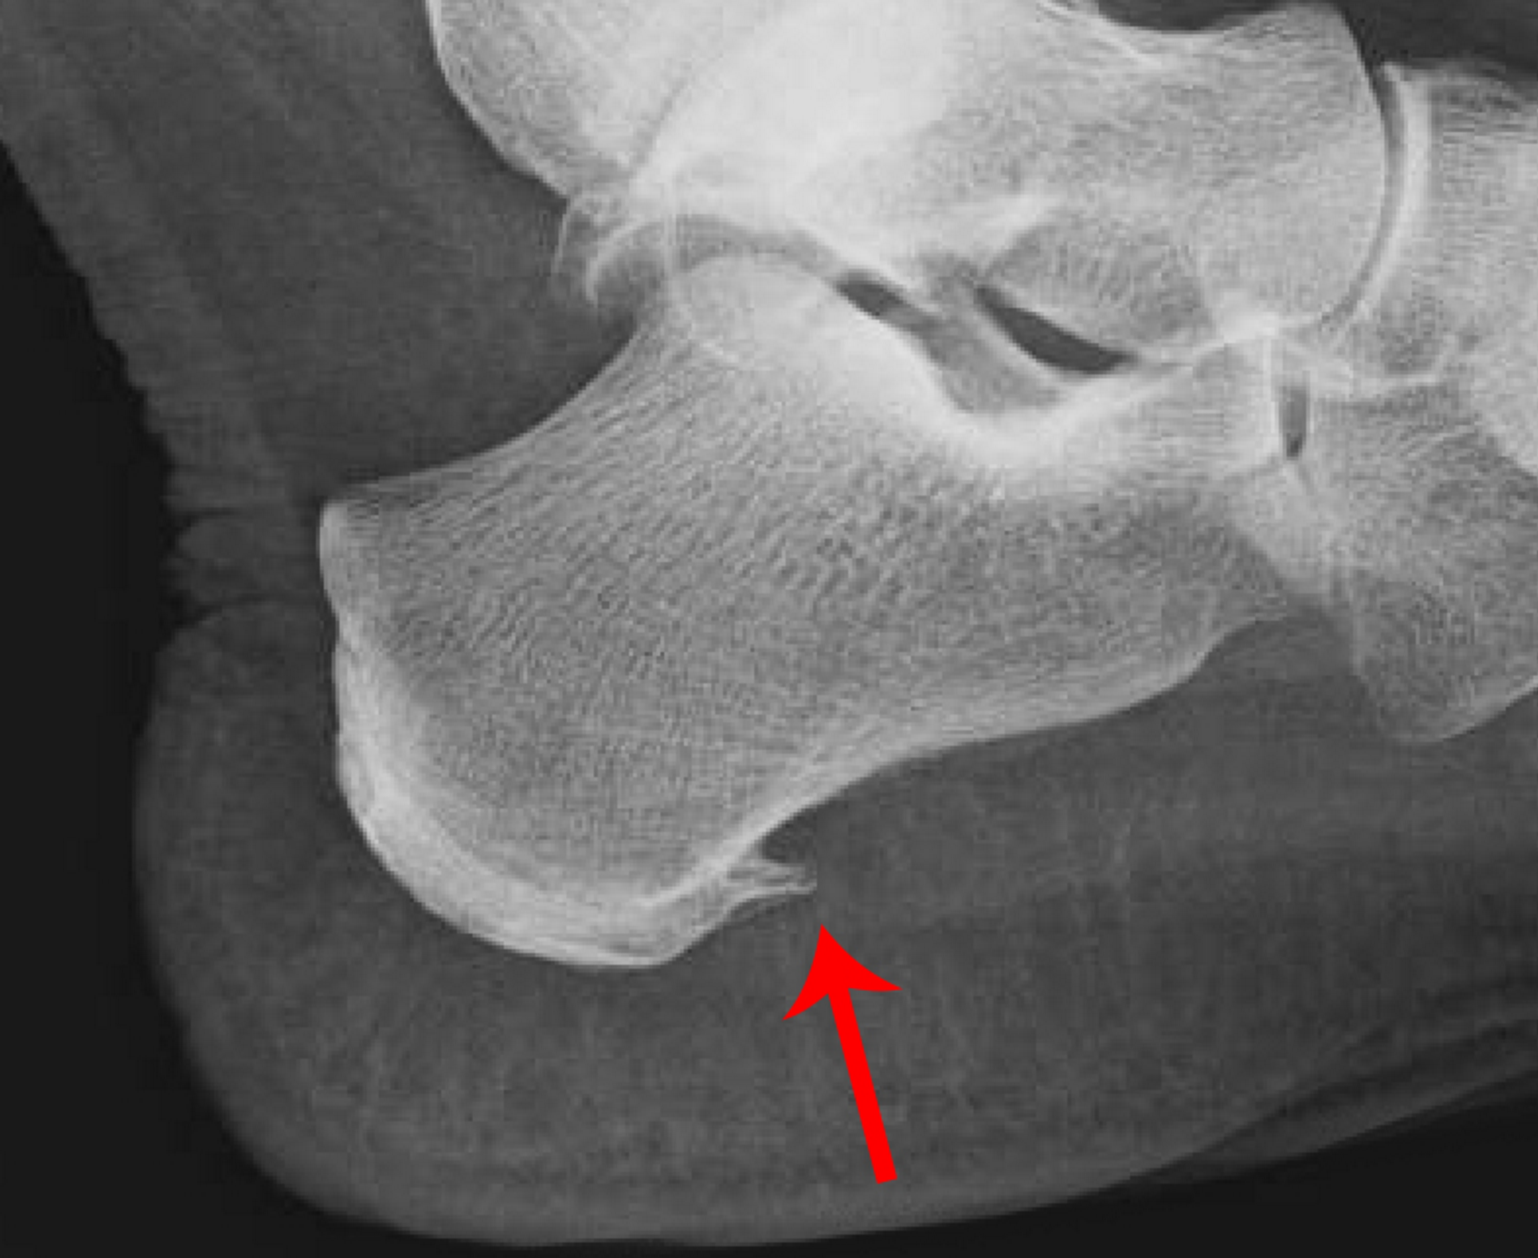 A Heel Spur May Be Misdiagnosed